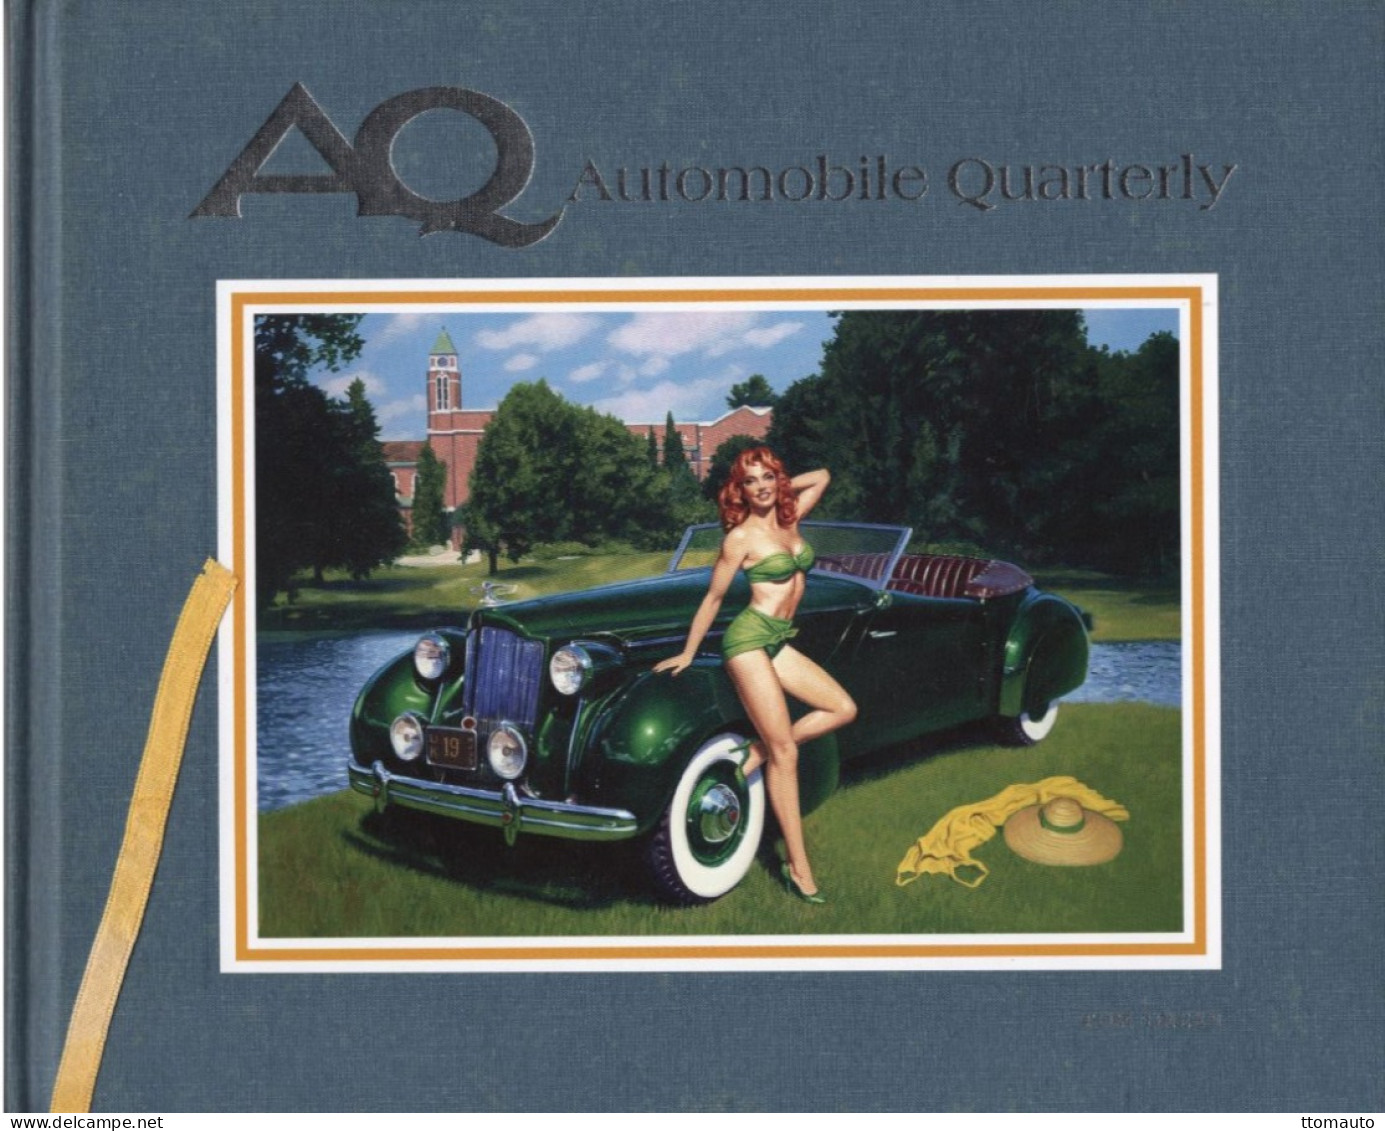 Automobile Quarterly Volume 48 Number 2 (Apr 2008) - Delage-Austin FX4-Lanchester - FREE SHIPPING TO EUROPE & US - Transportes